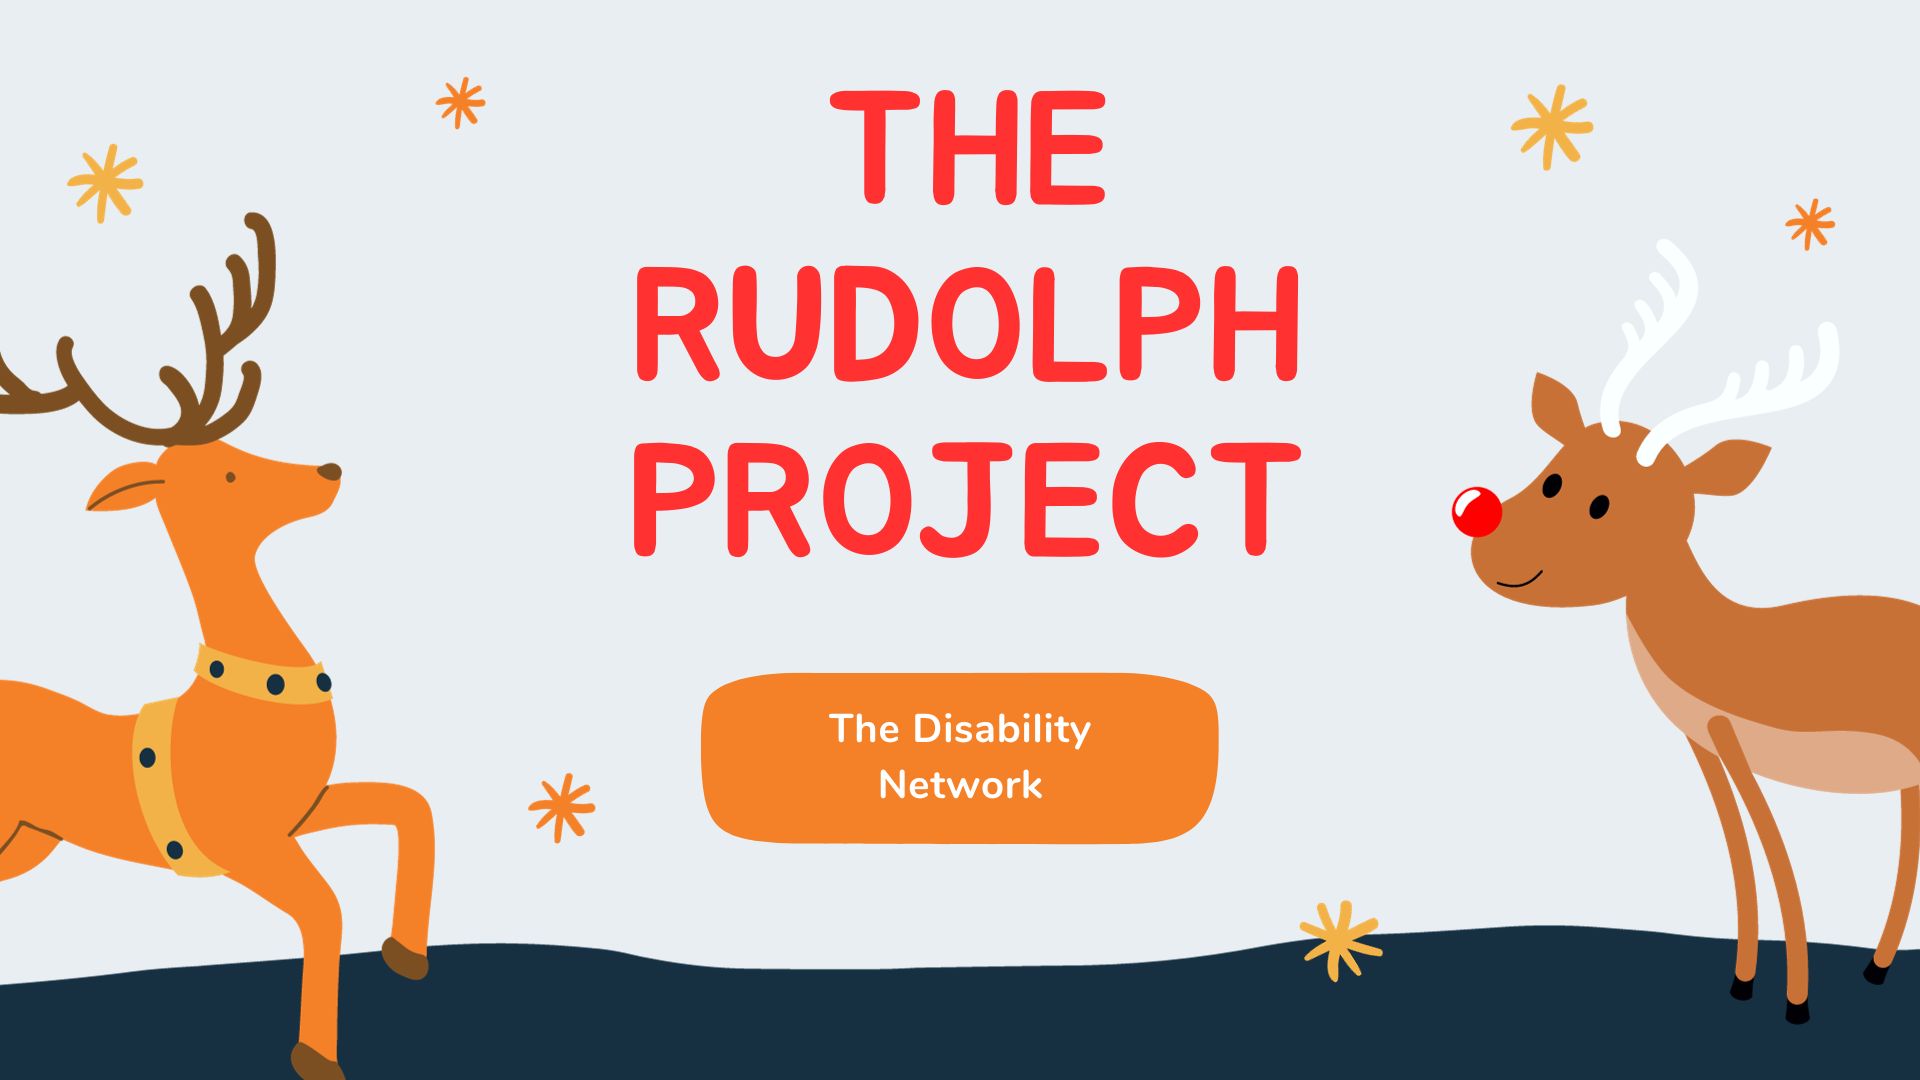 The Rudolph Project presented by The Disability Network